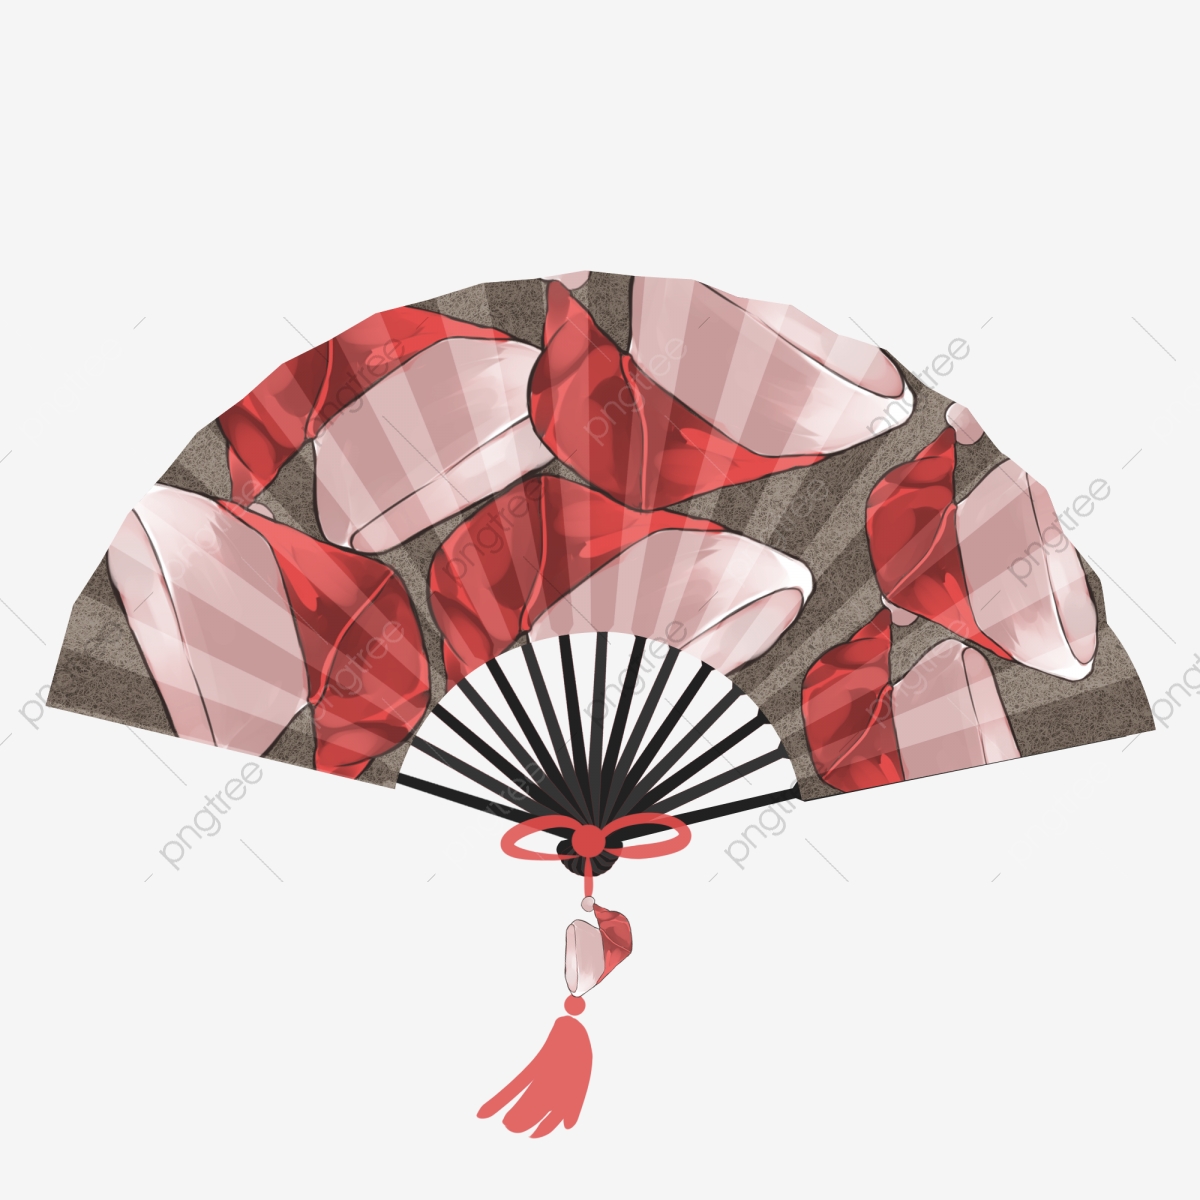 fan clipart hat chinese